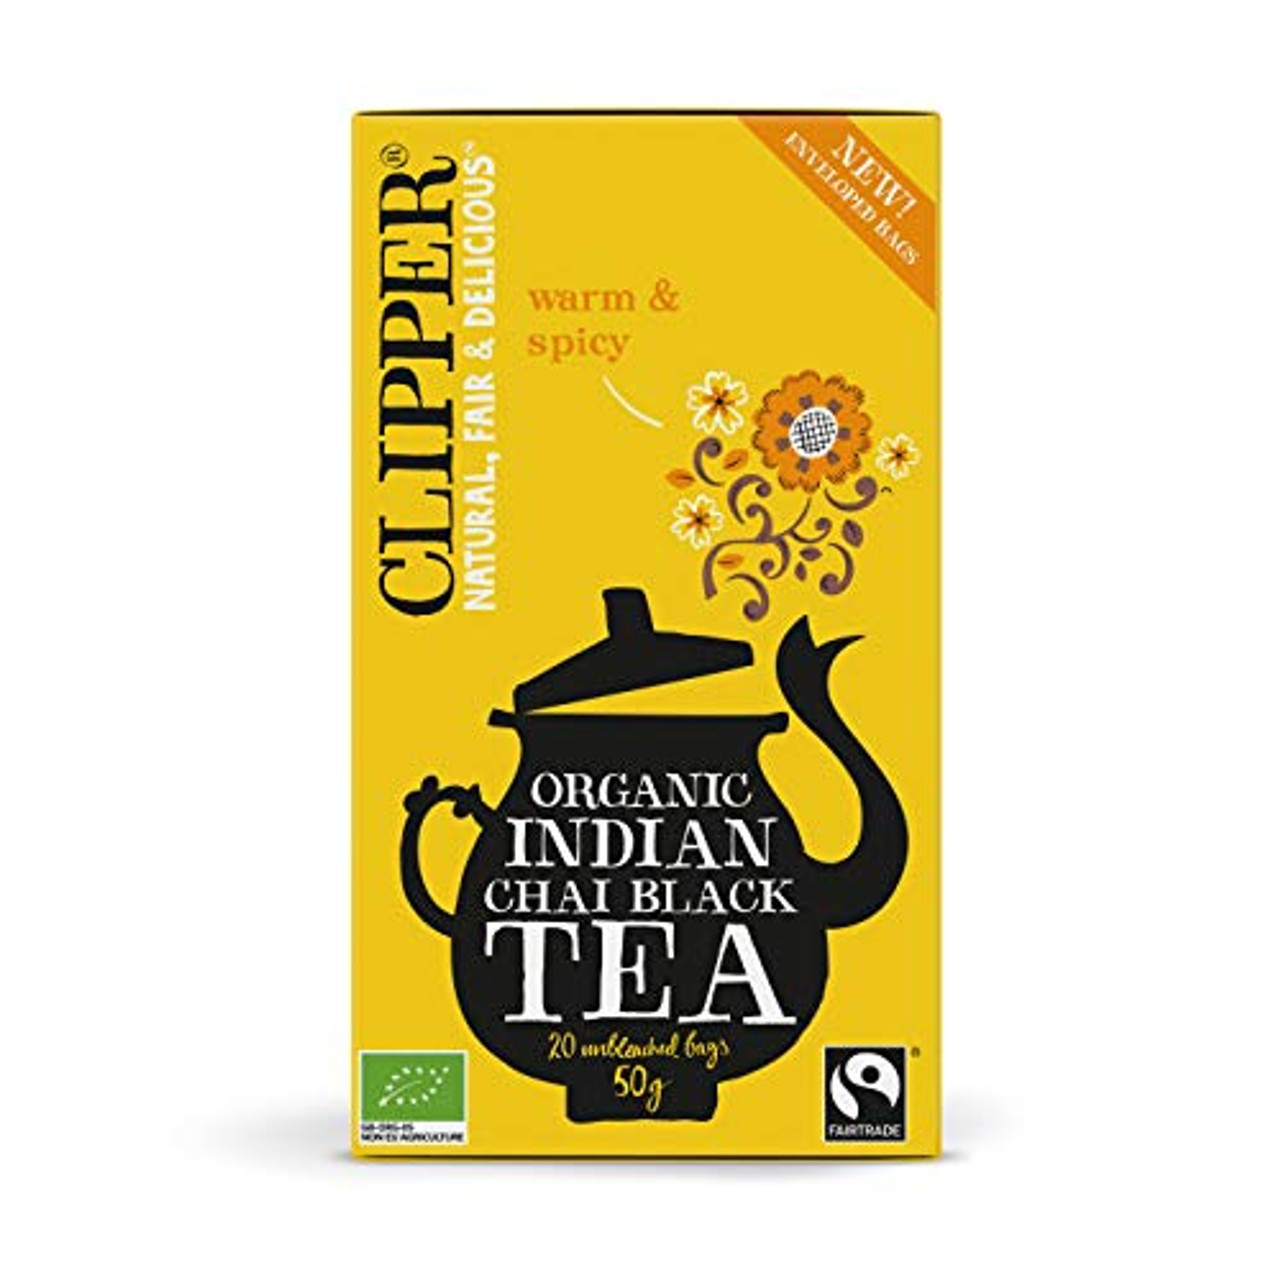 The Indian Chai Cough  Cold Tea Get 3 Nylon Tea Bags Free Buy packet of  100 gm Tea at best price in India  1mg